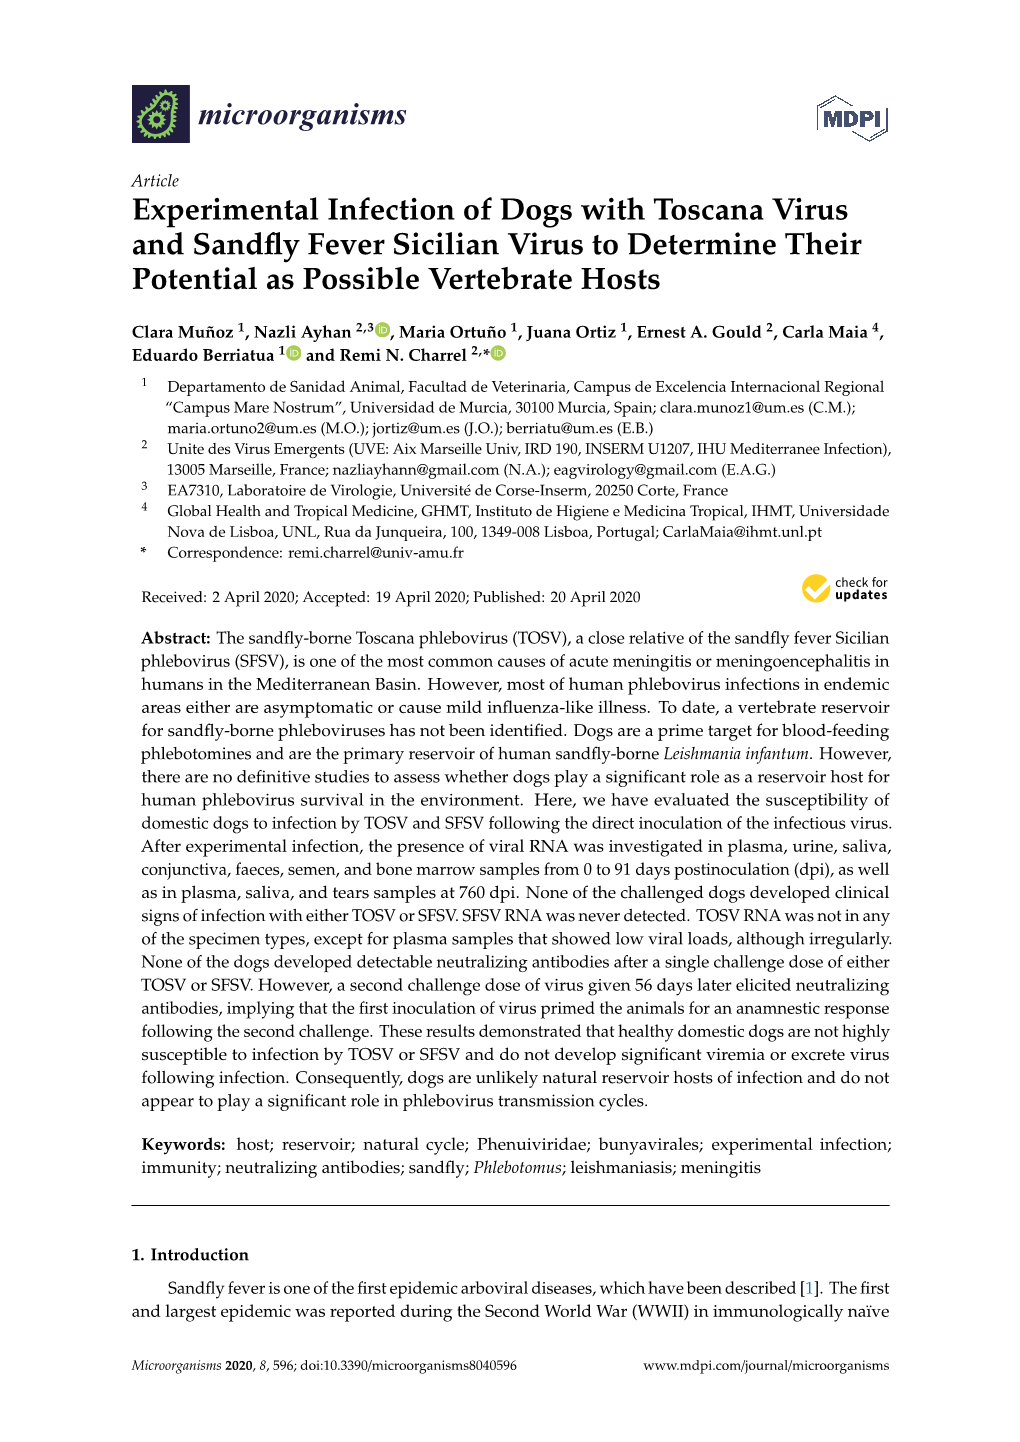 Experimental Infection of Dogs with Toscana Virus and Sandﬂy Fever Sicilian Virus to Determine Their Potential As Possible Vertebrate Hosts